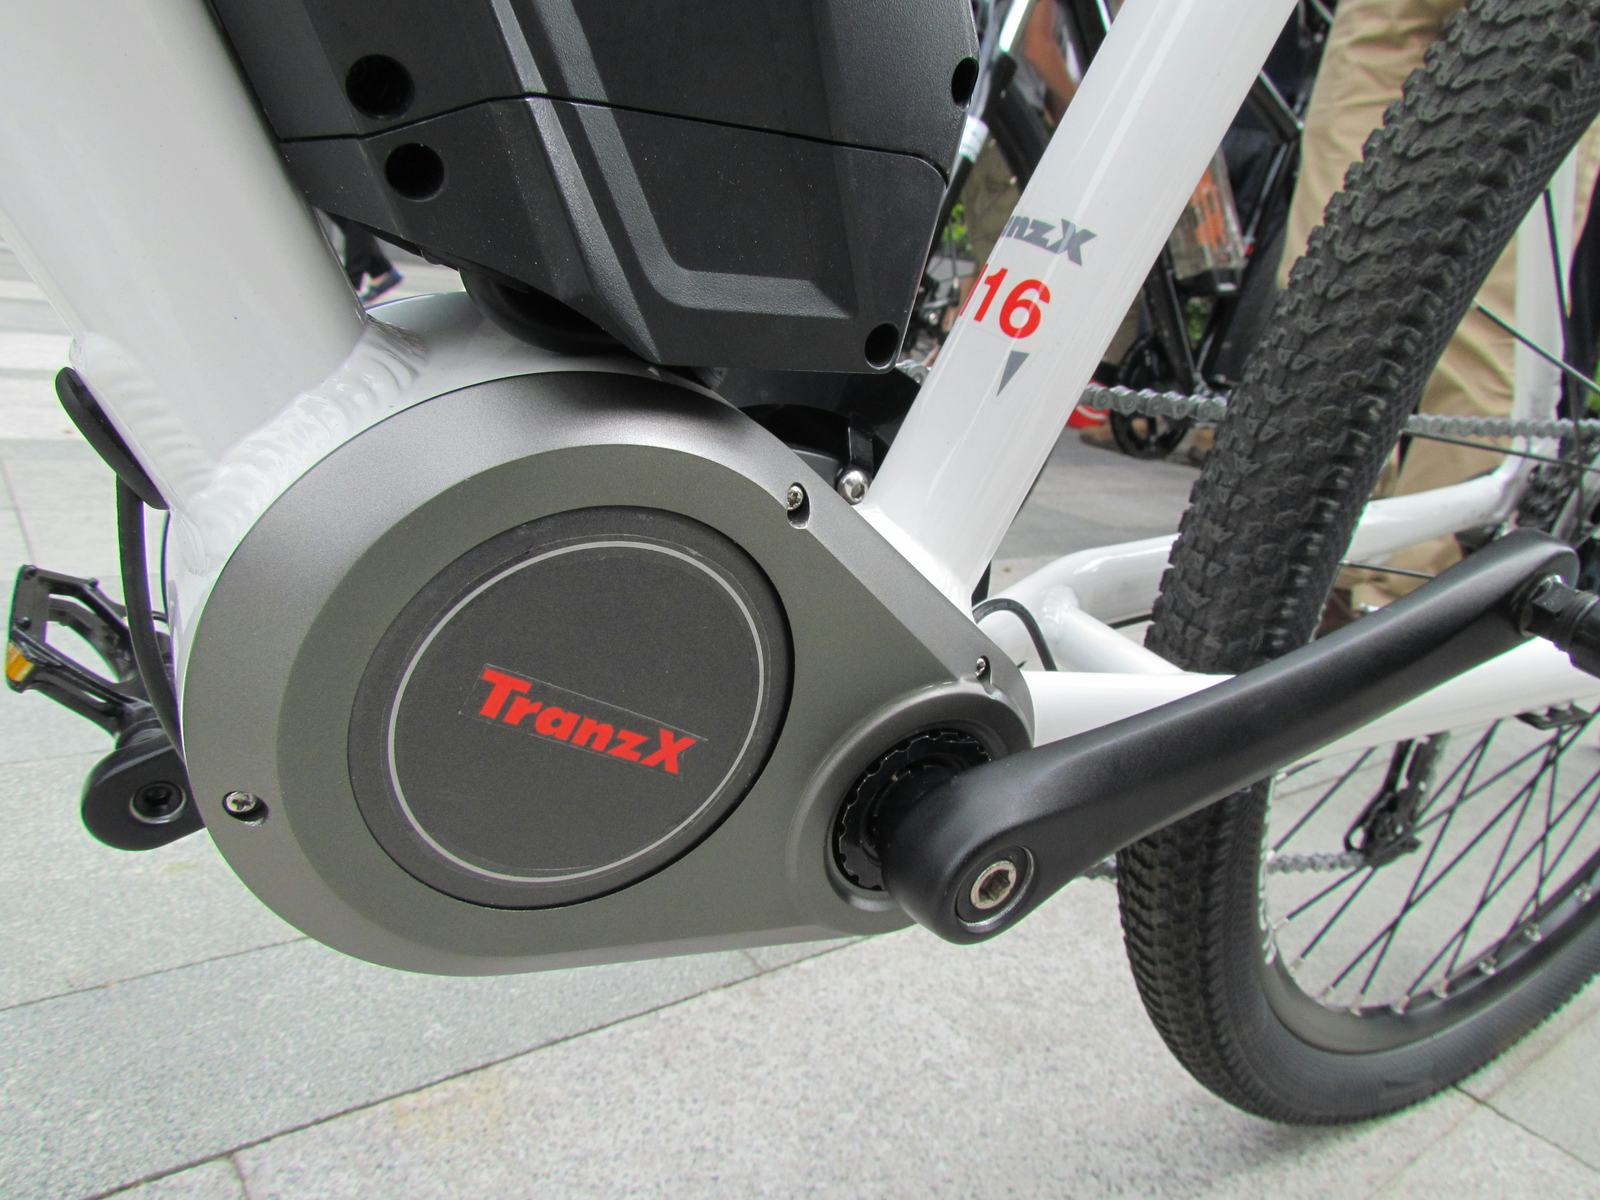 Sneak preview of the new M16 TranzX system targeting budget e-bikes. – Photo Bike Europe